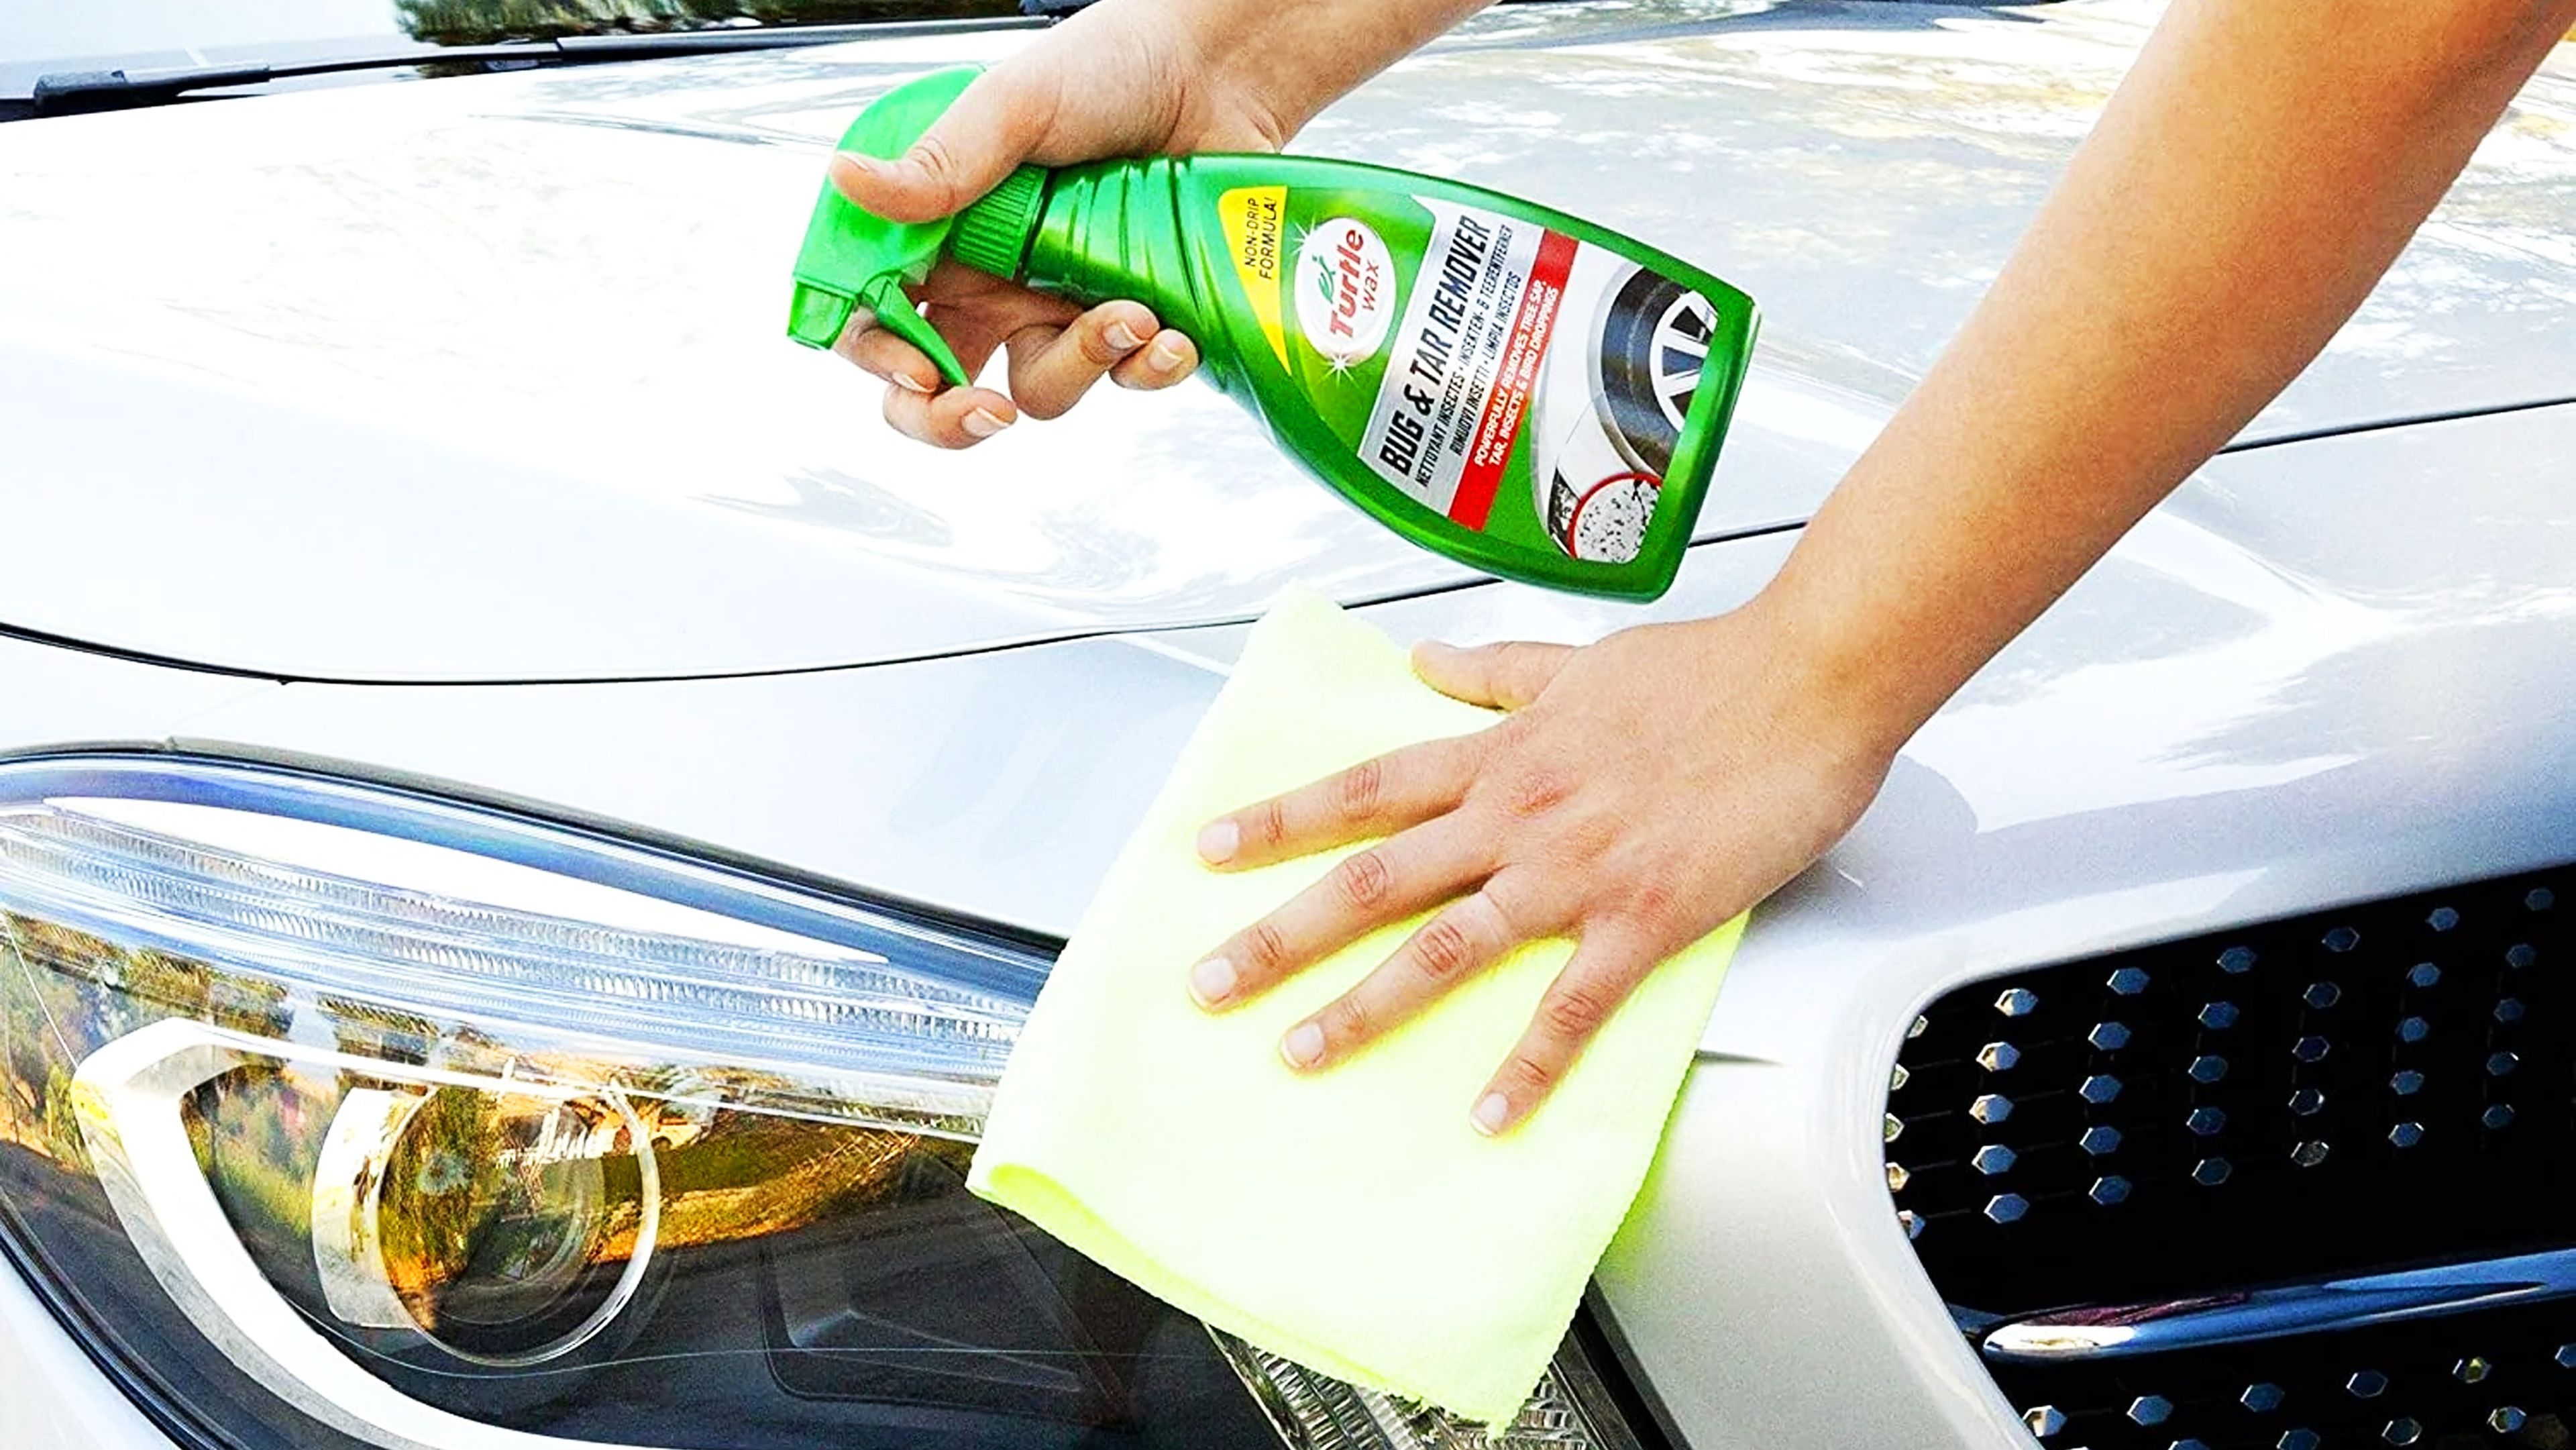 Turtle Wax Insect Remover